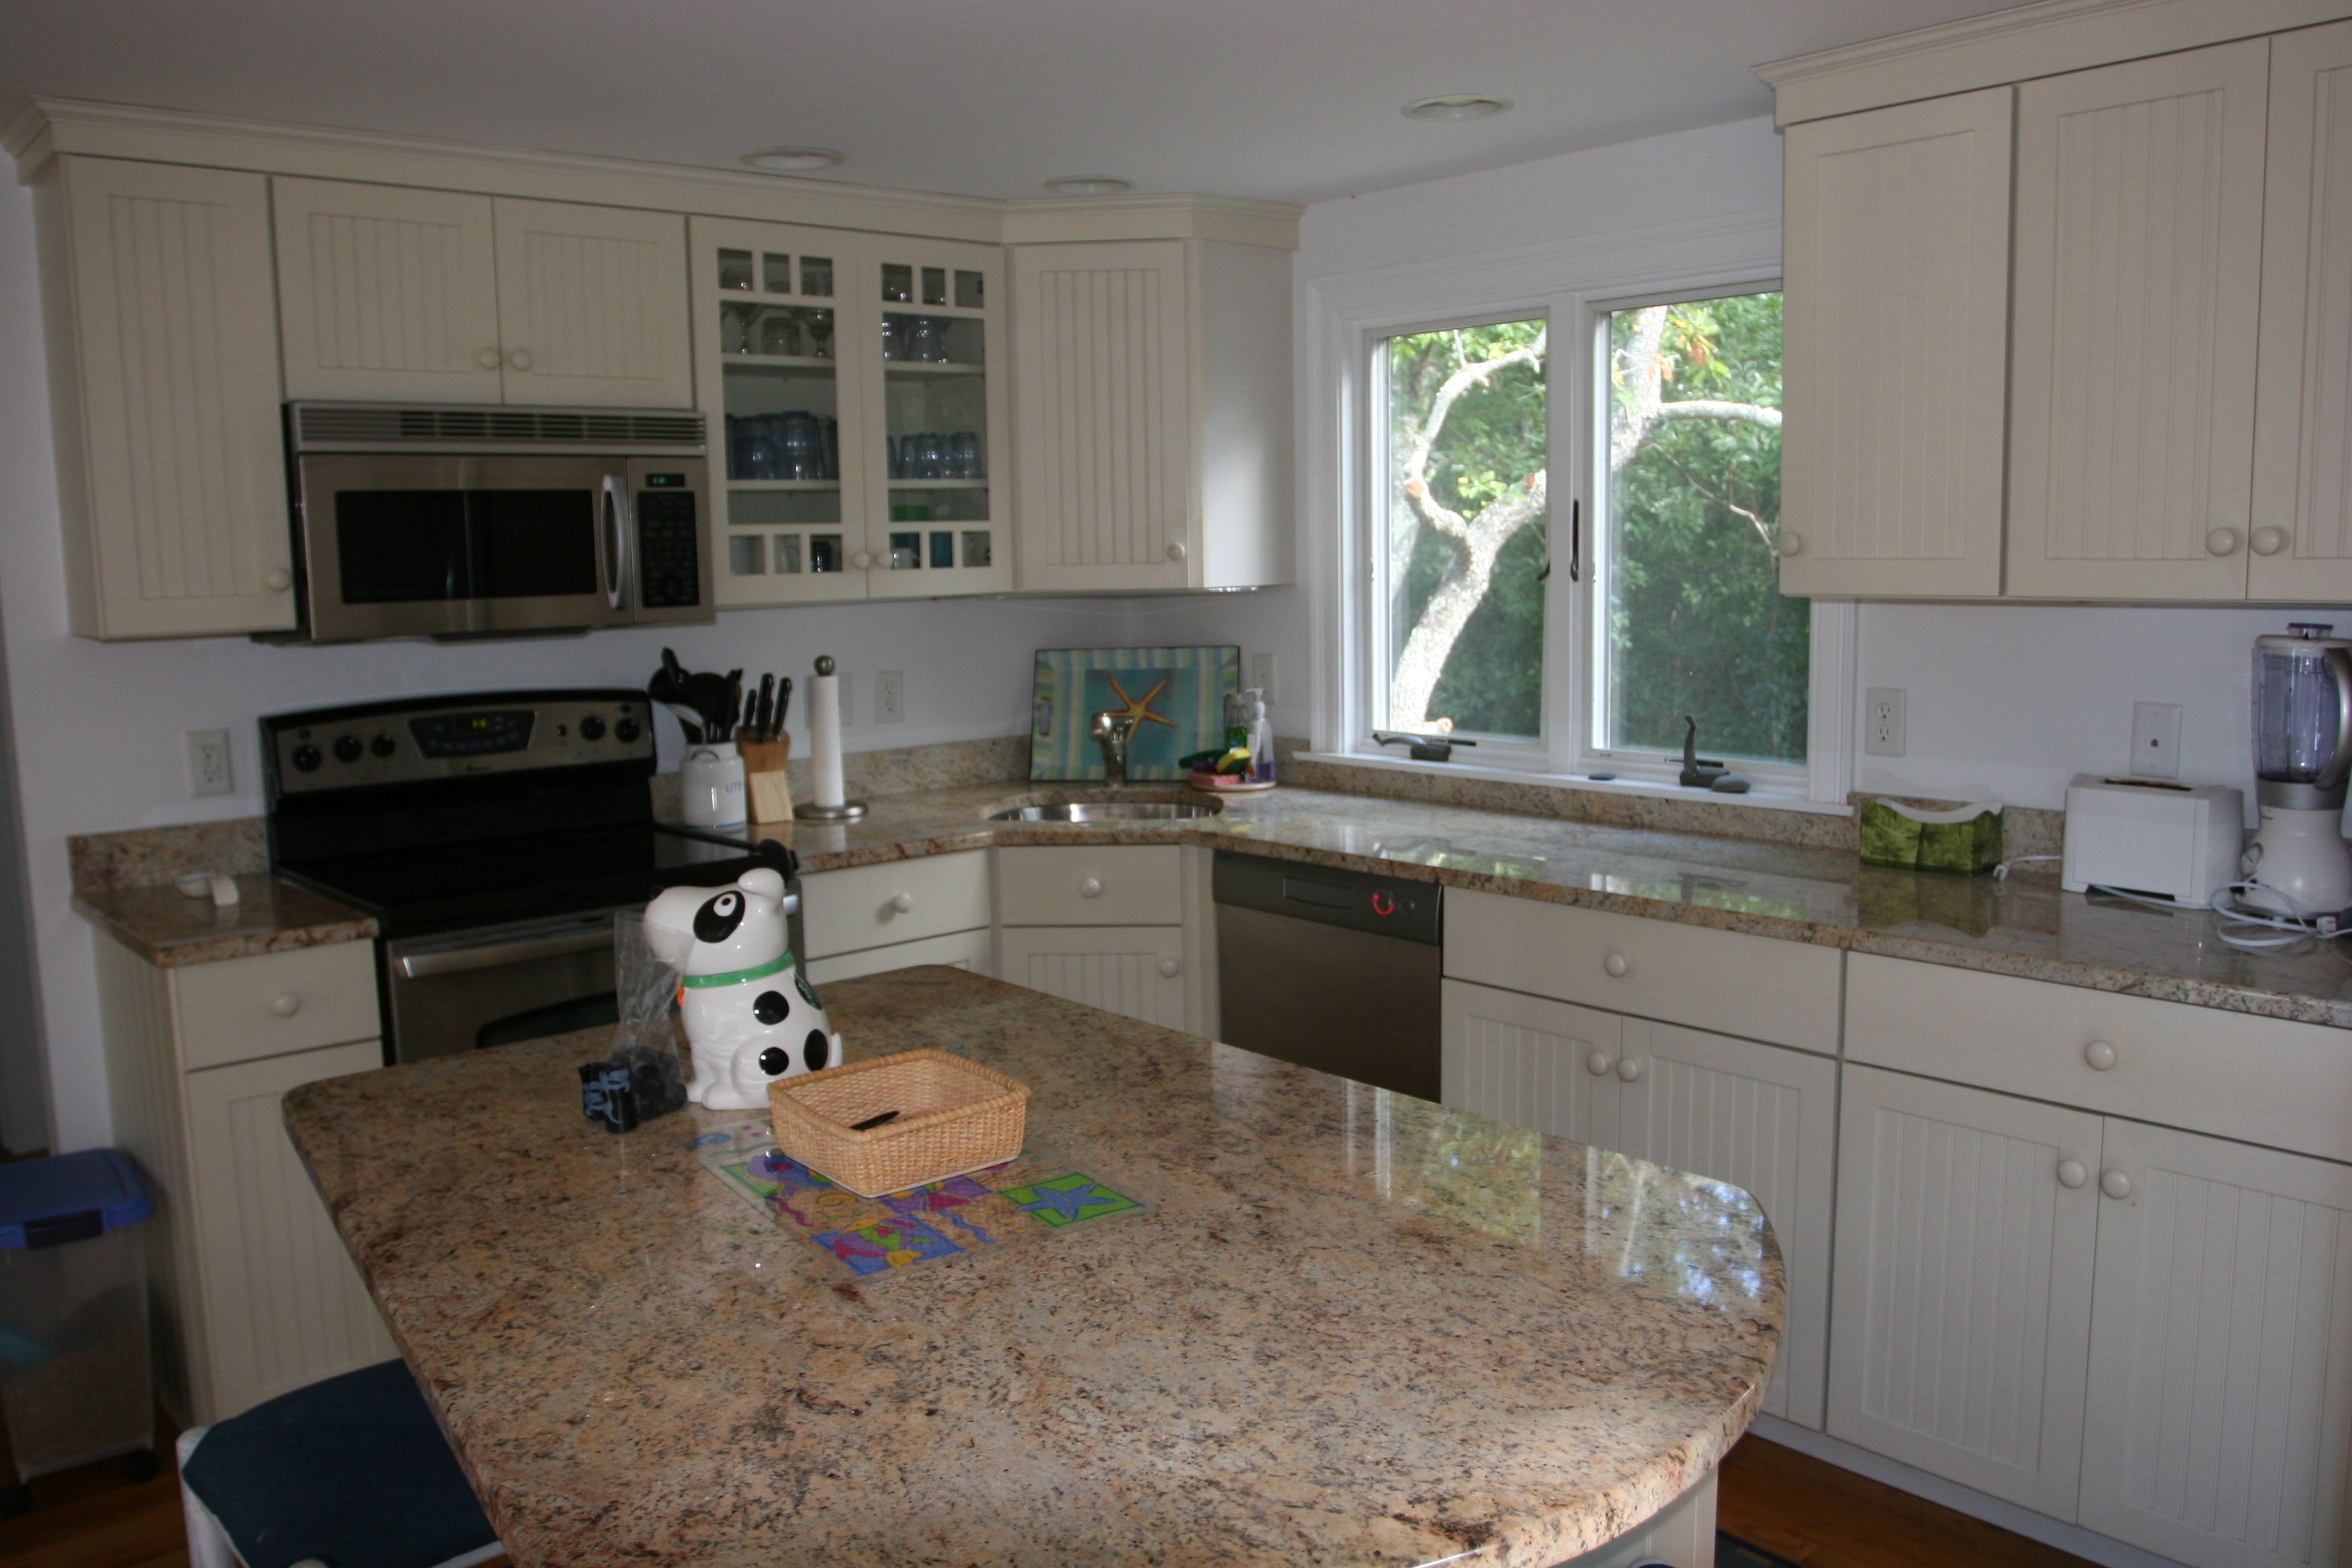 Look, everyone, a kitchen! With appliances, countertops and a sink! And a dishwasher!